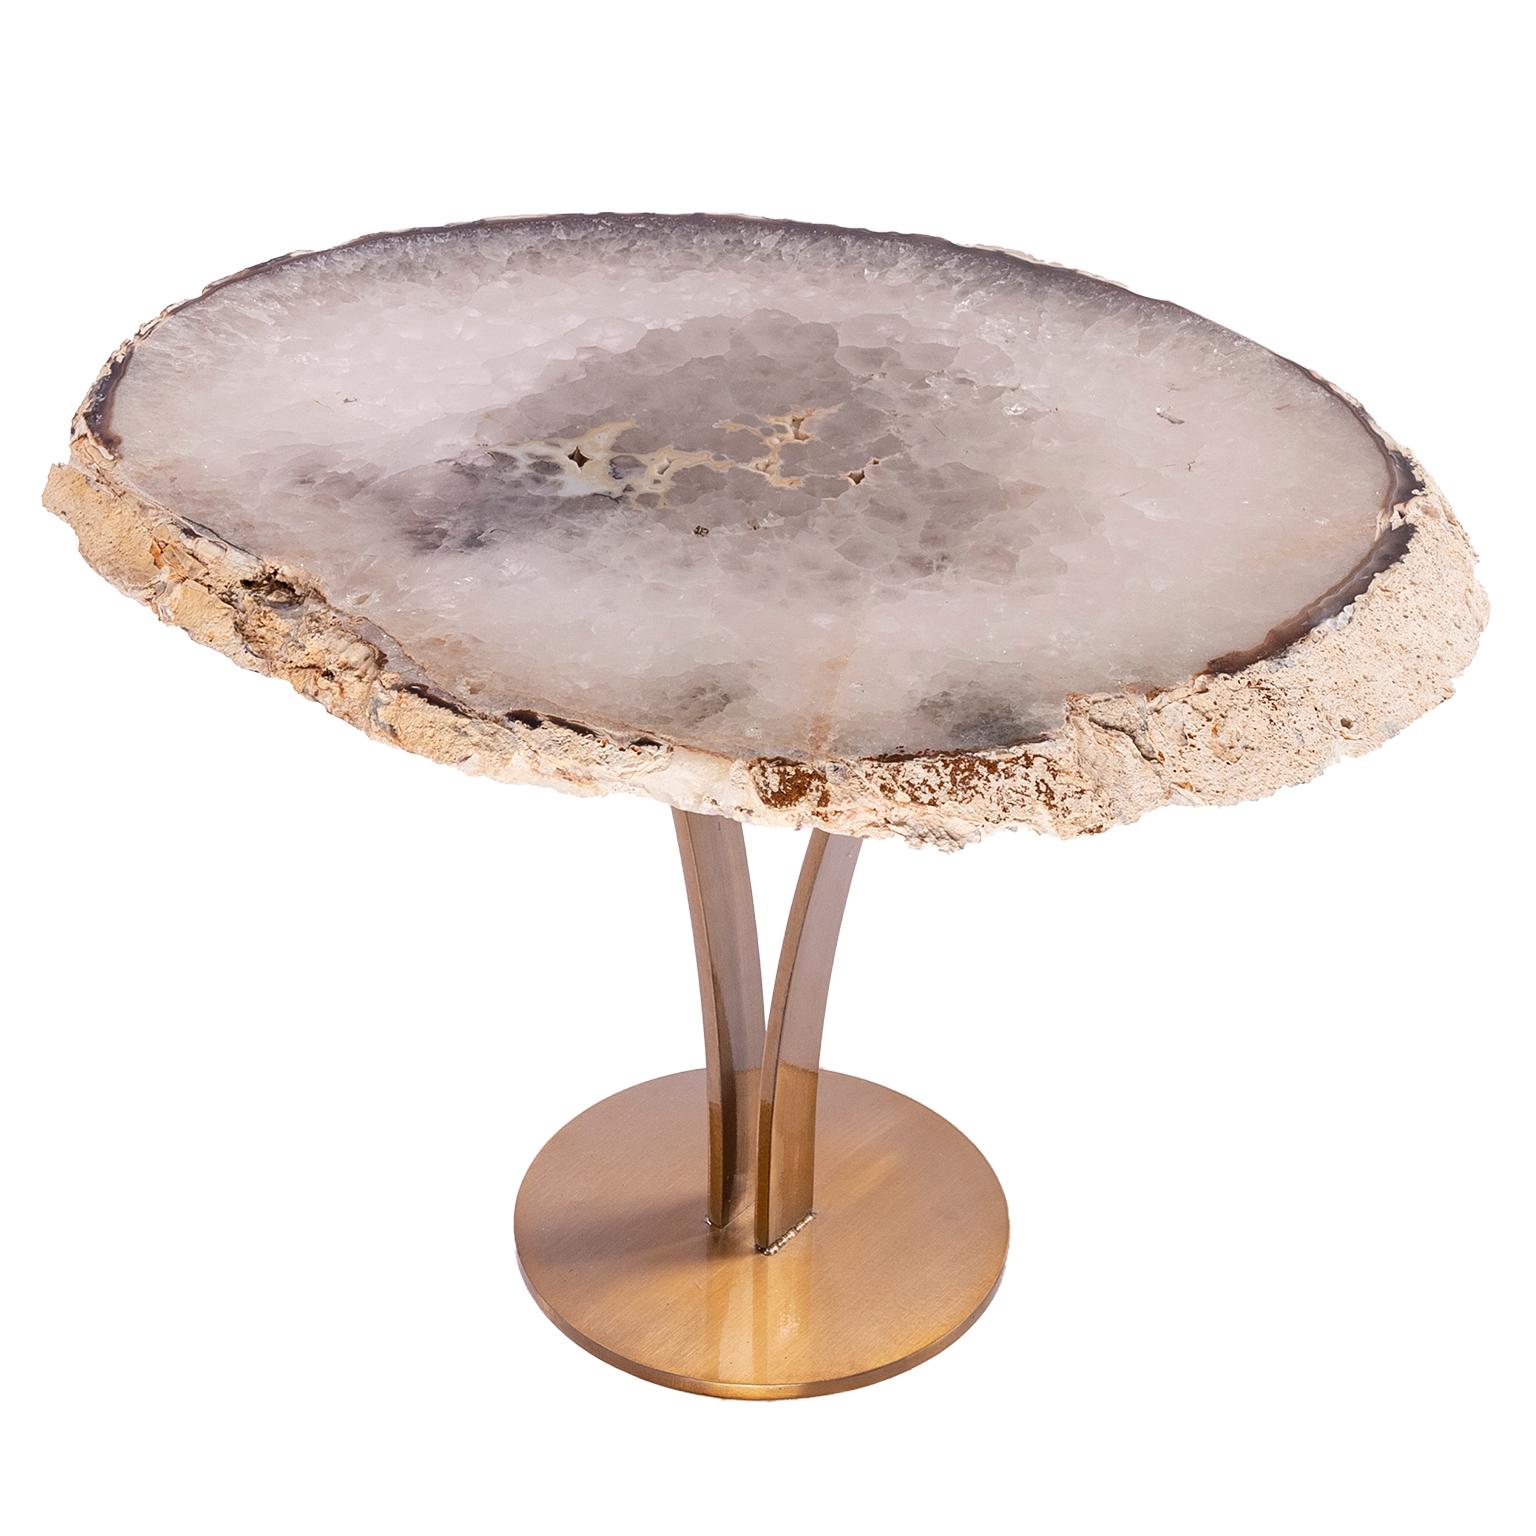 This agate slab forming a side table or cocktail table, is from Brazil and has a combination of colors with hints of blue, grey and white. Agates are formed in rounded nodules, which are sliced open to bring out the internal pattern hidden in the